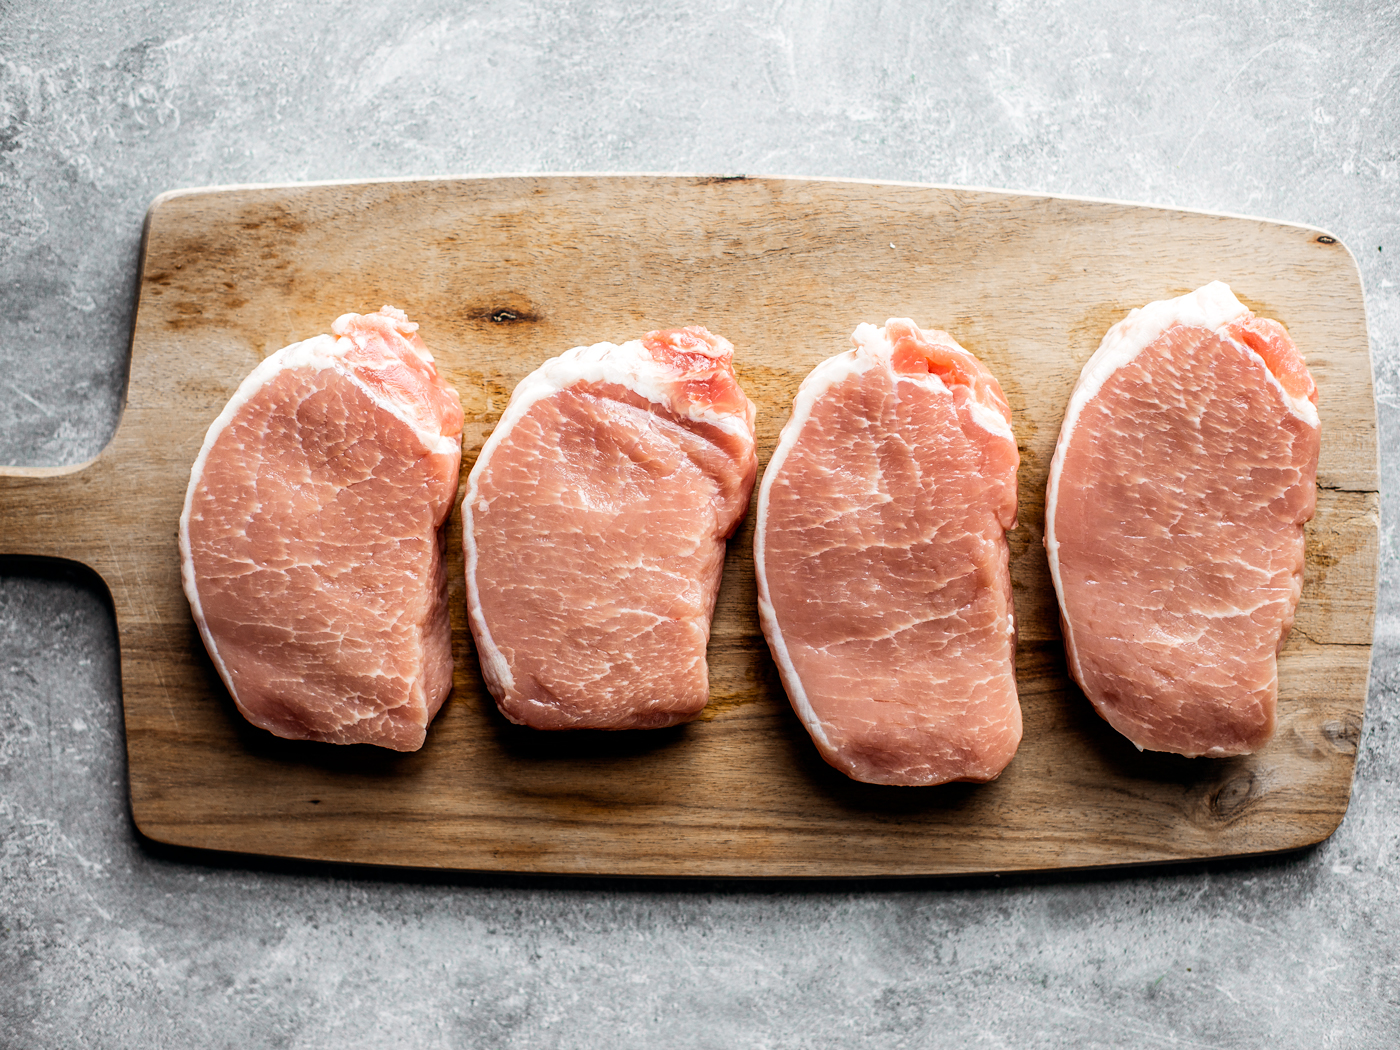 Four pork chops lined up on a cutting board.